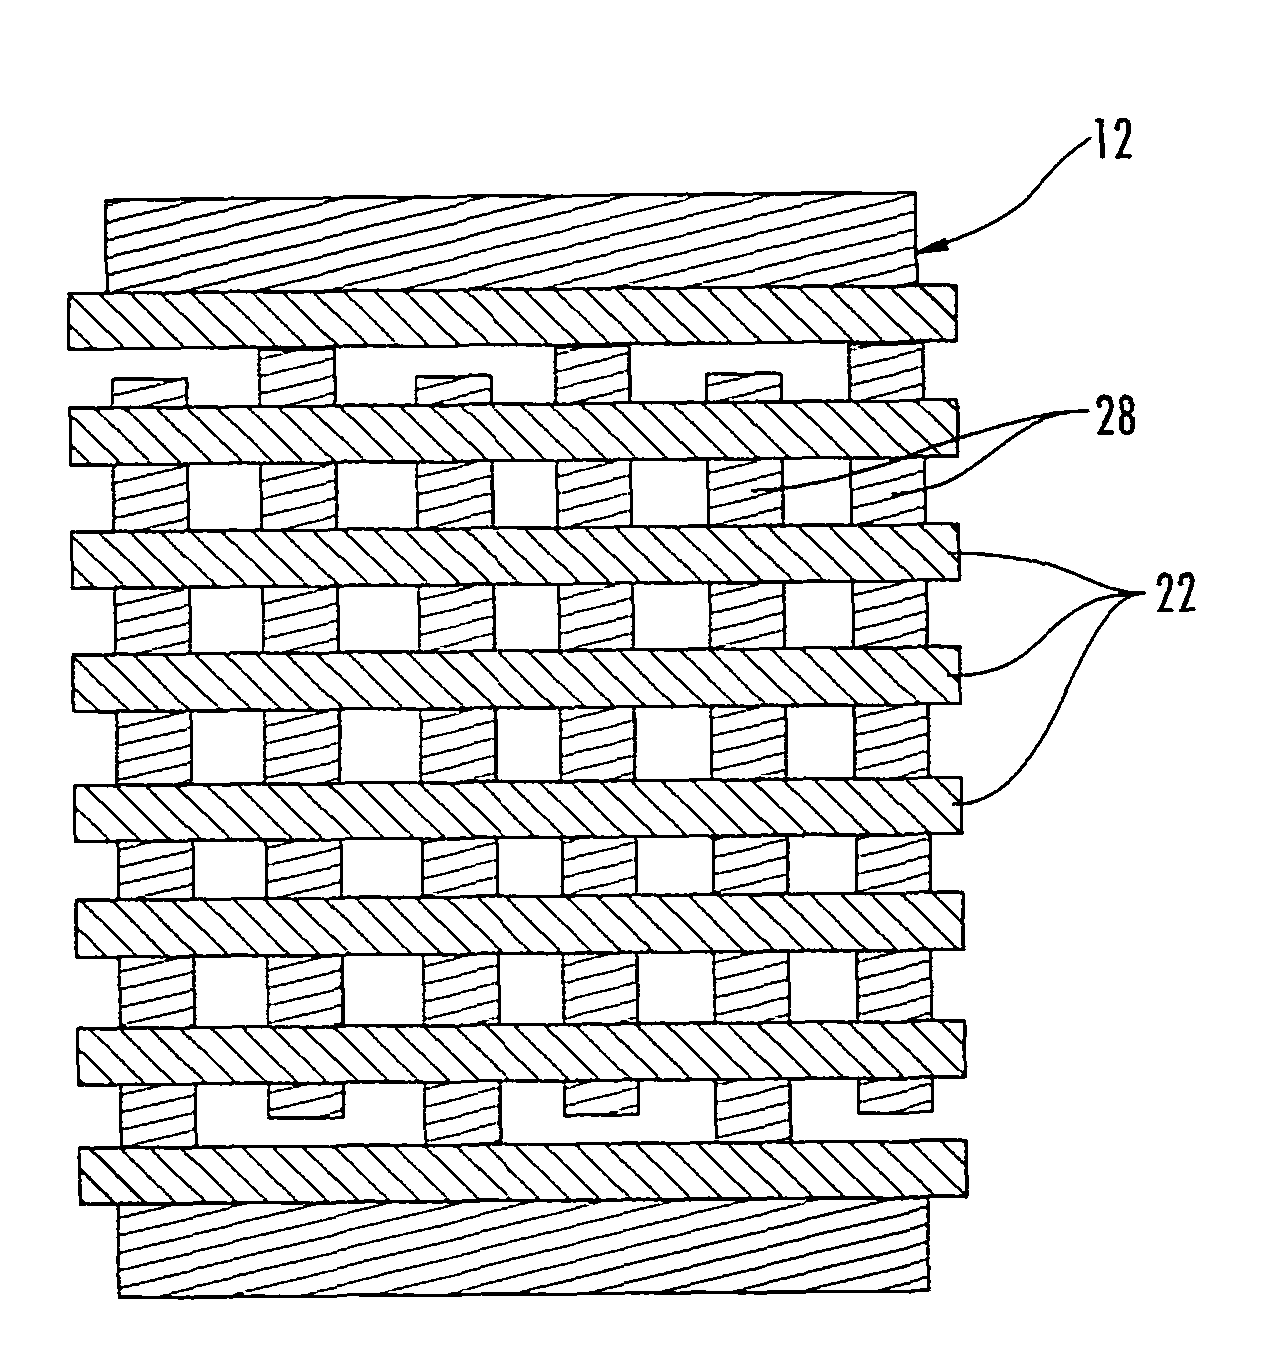 Acoustic wave device employing reflective elements for confining elastic energy